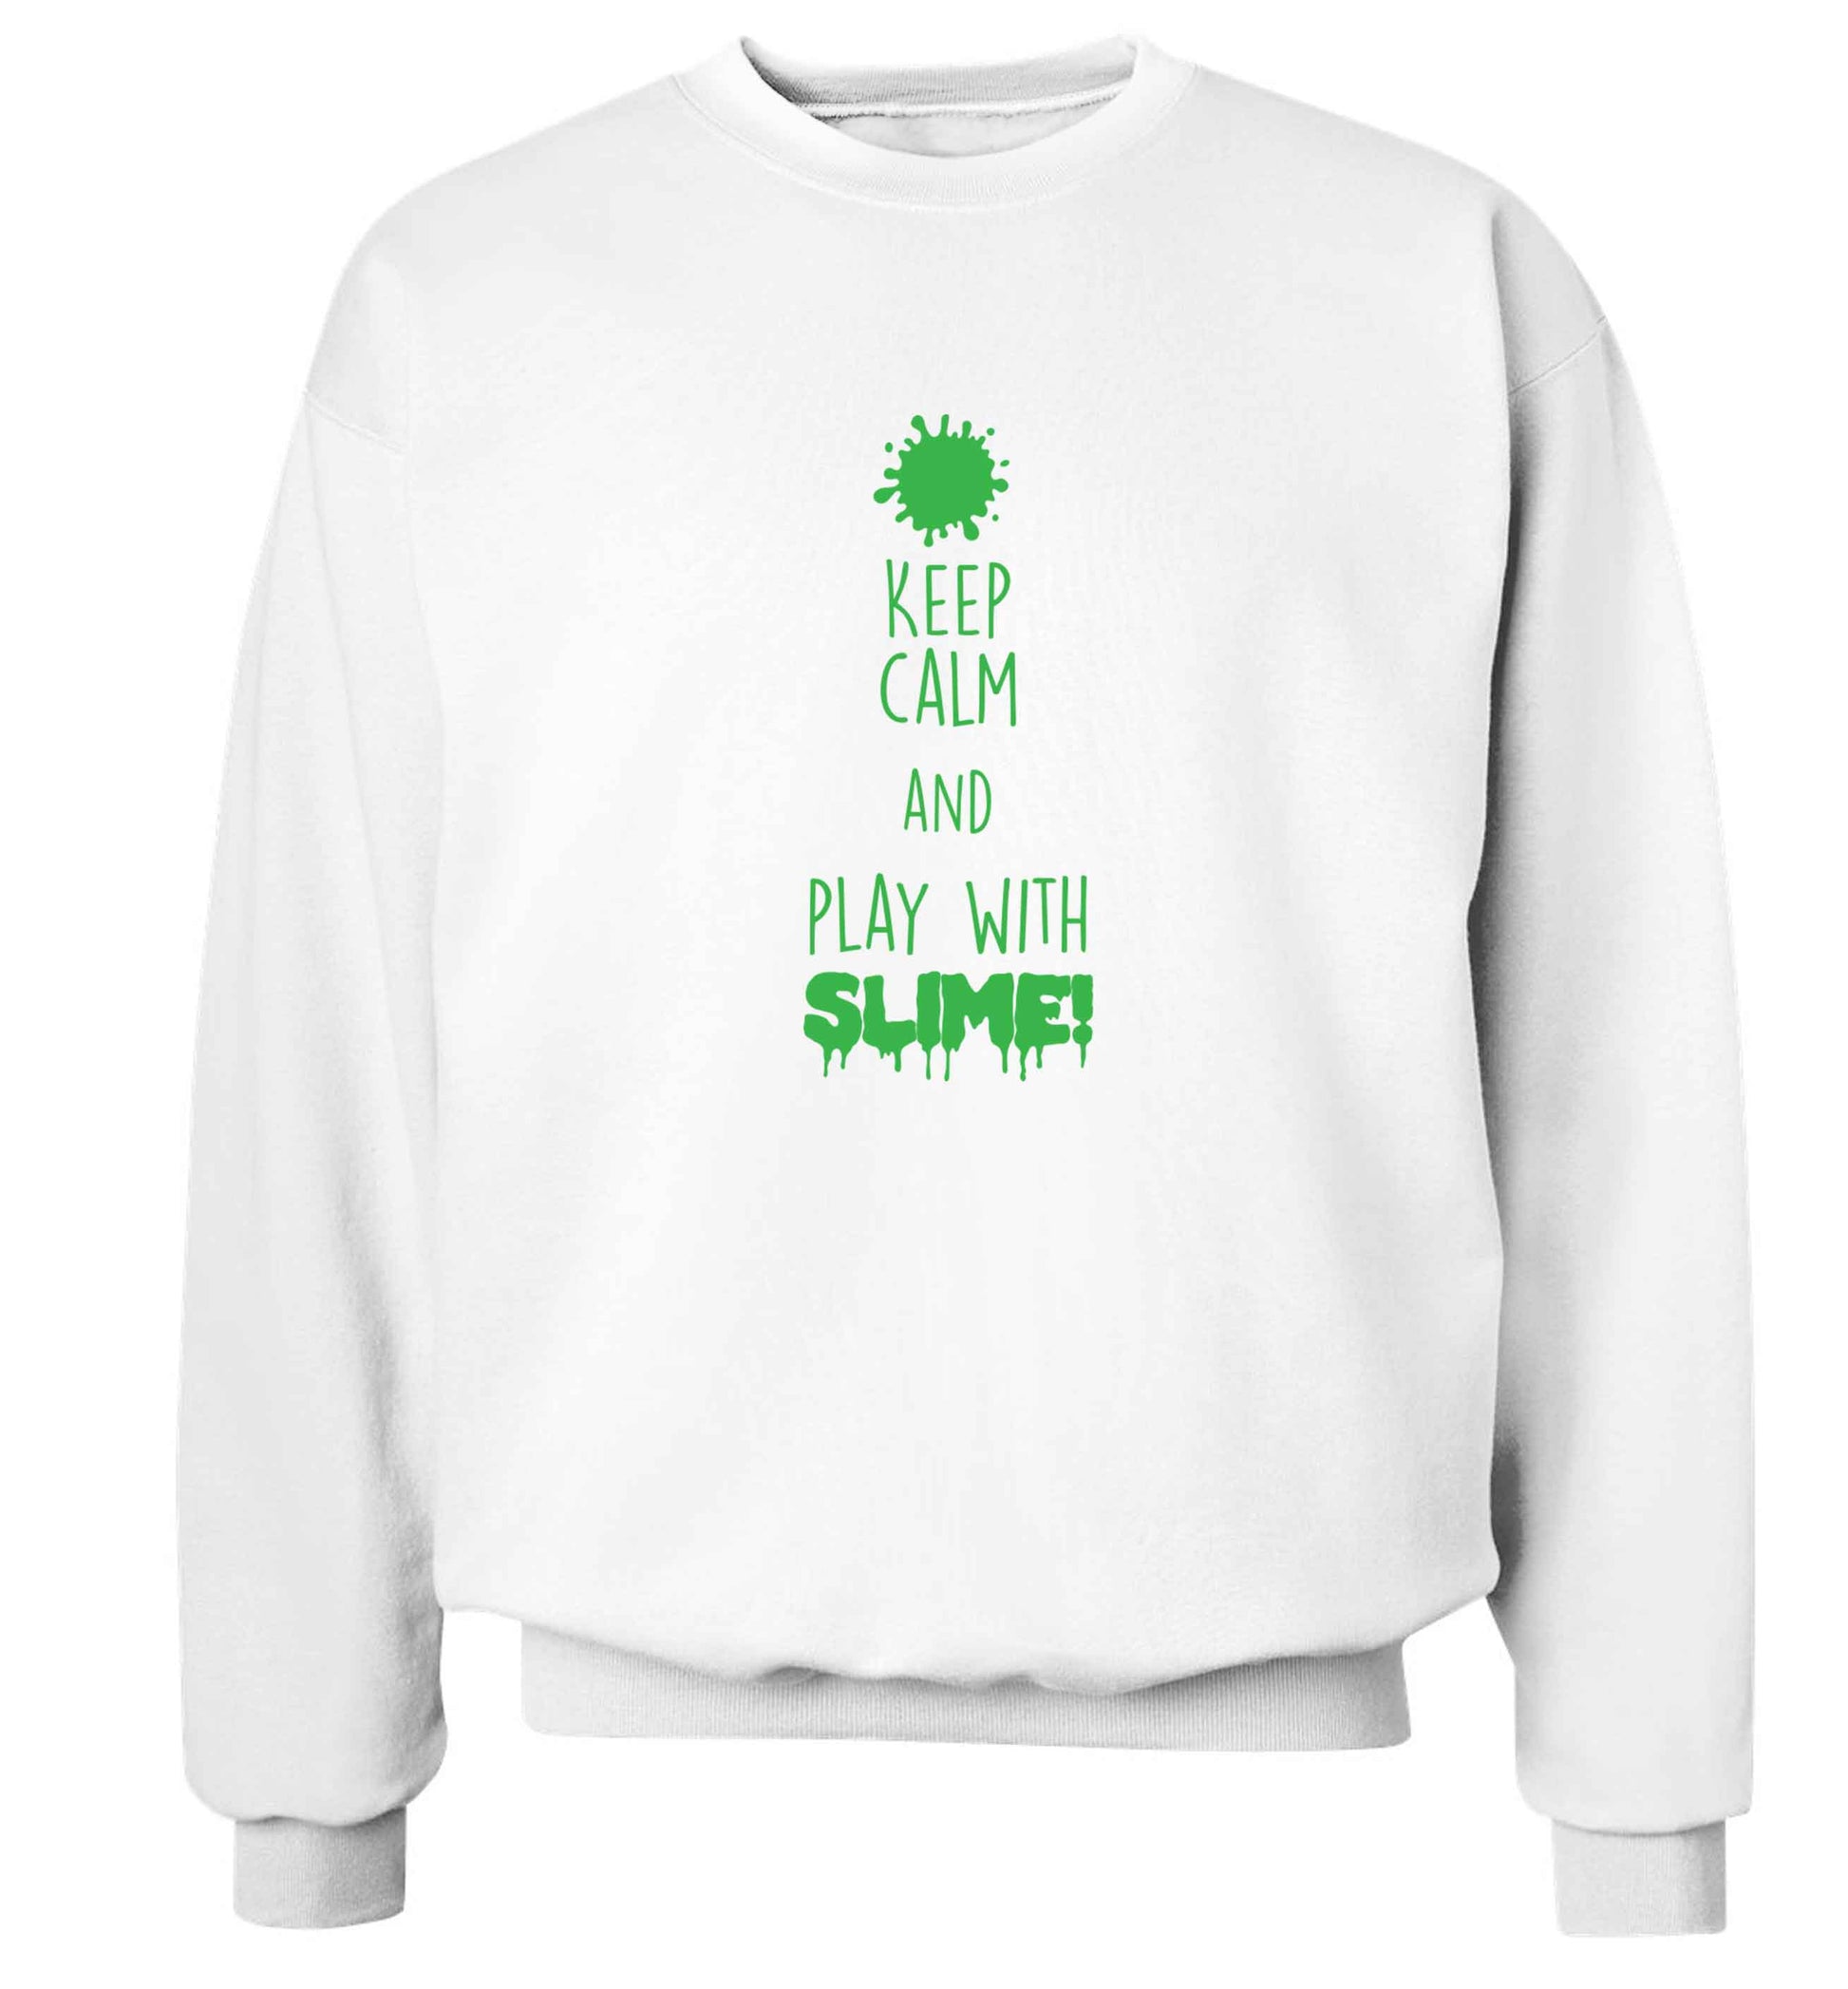 Neon green keep calm and play with slime!adult's unisex white sweater 2XL